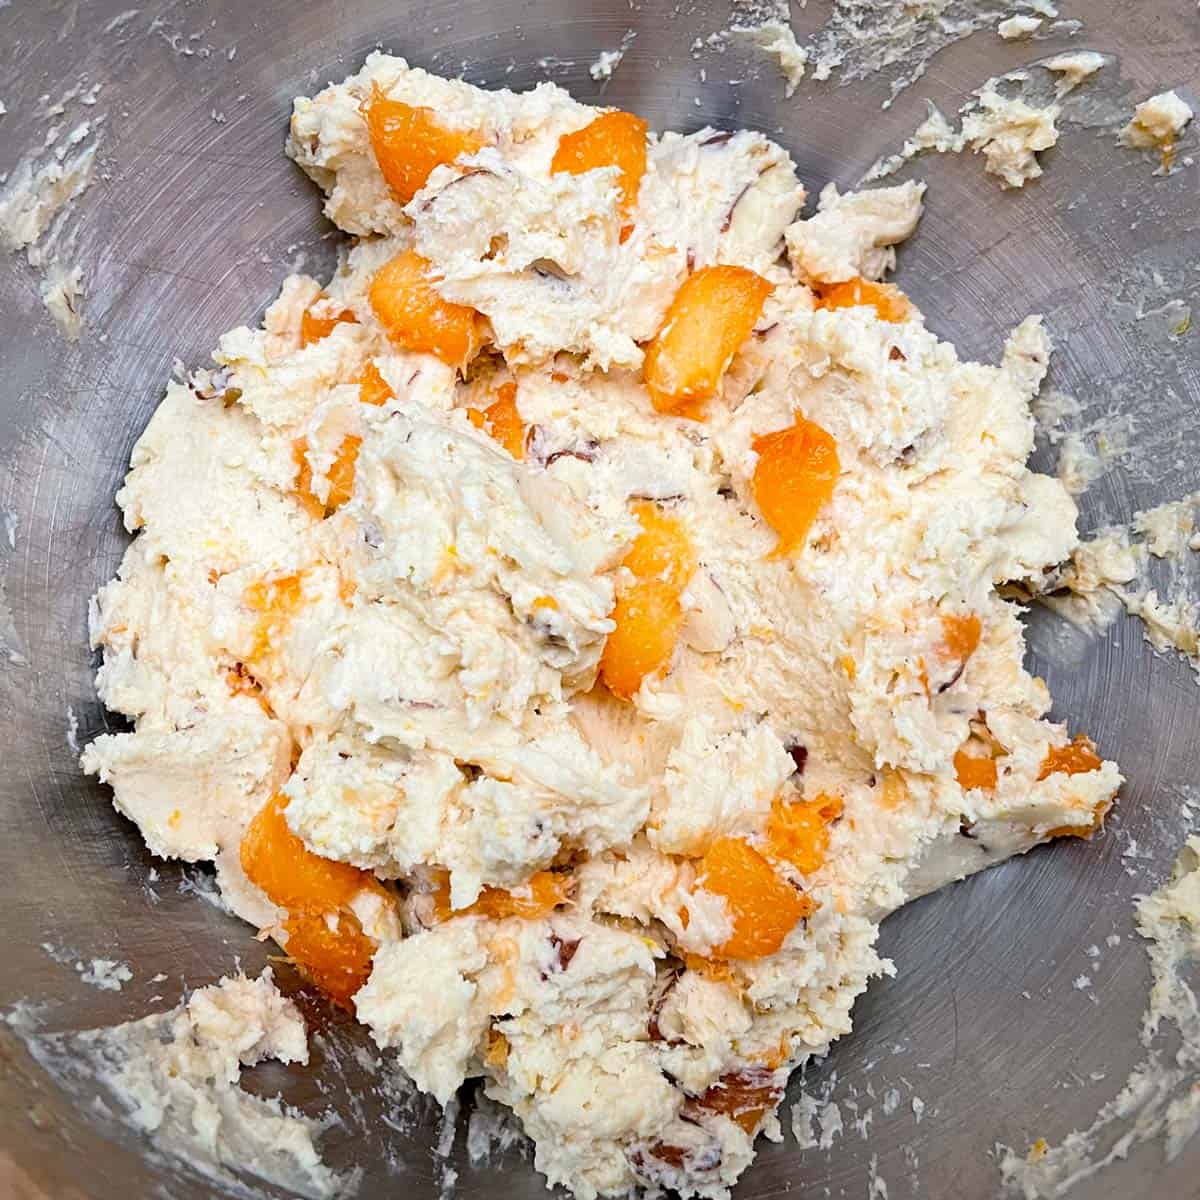 All ingredients in the mixing bowl with chunks of apricot throughout the cookie dough.